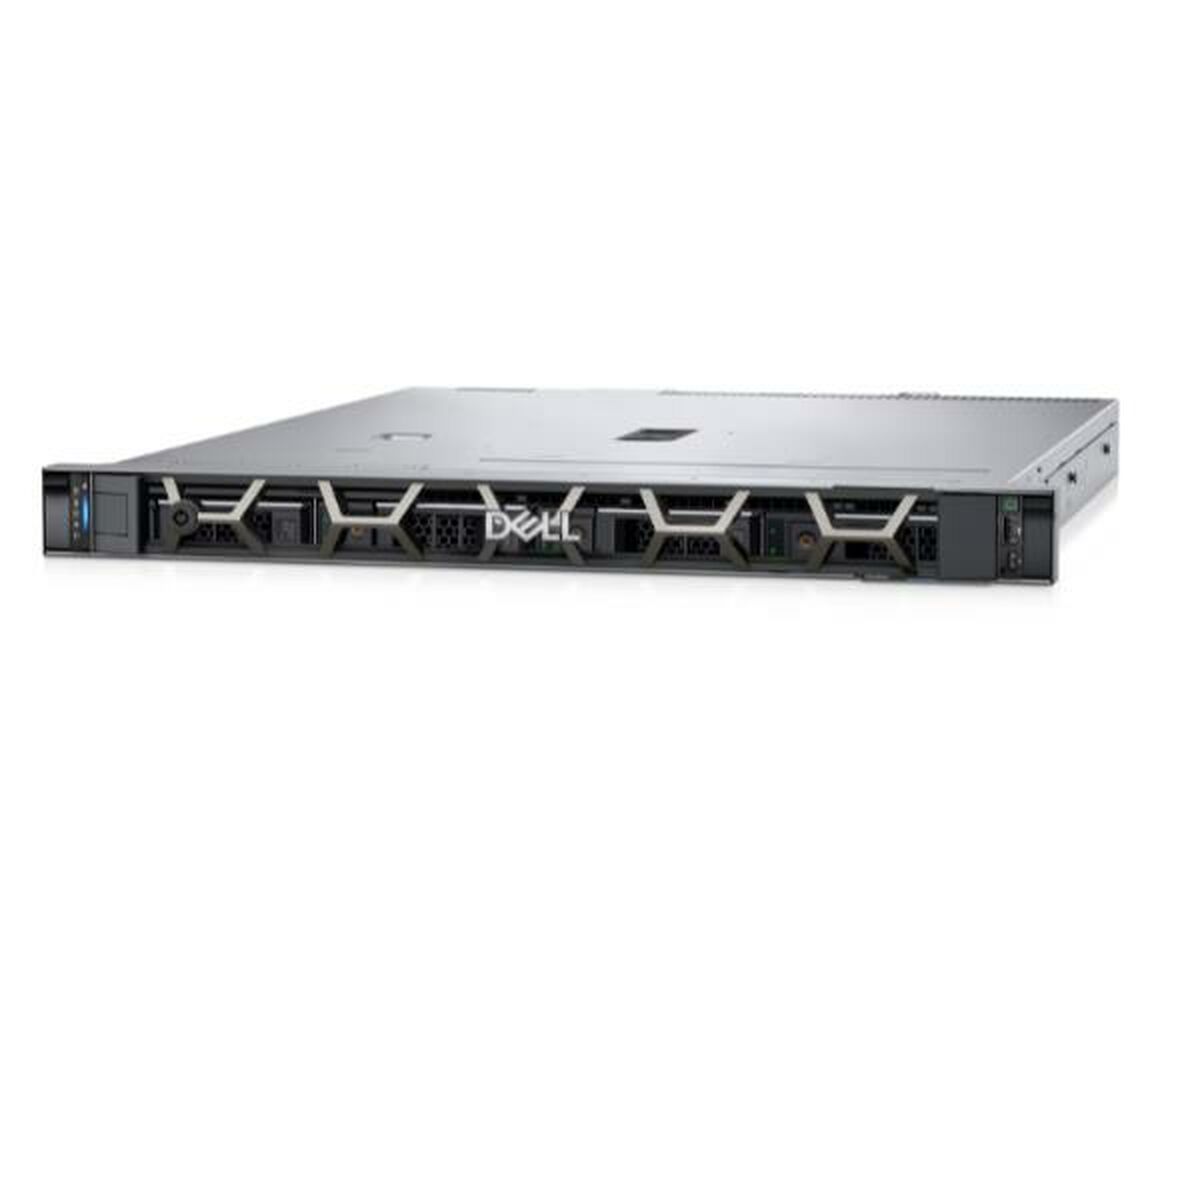 Server Dell PowerEdge R250 Xeon E-2314 16 GB RAM 2 TB, Dell, Computing, server-dell-poweredge-r250-xeon-e-2314-16-gb-ram-2-tb, :RN OFFICE, Brand_Dell, category-reference-2609, category-reference-2791, category-reference-2799, category-reference-t-19685, category-reference-t-19905, computers / components, Condition_NEW, office, Price_+ 1000, Teleworking, RiotNook